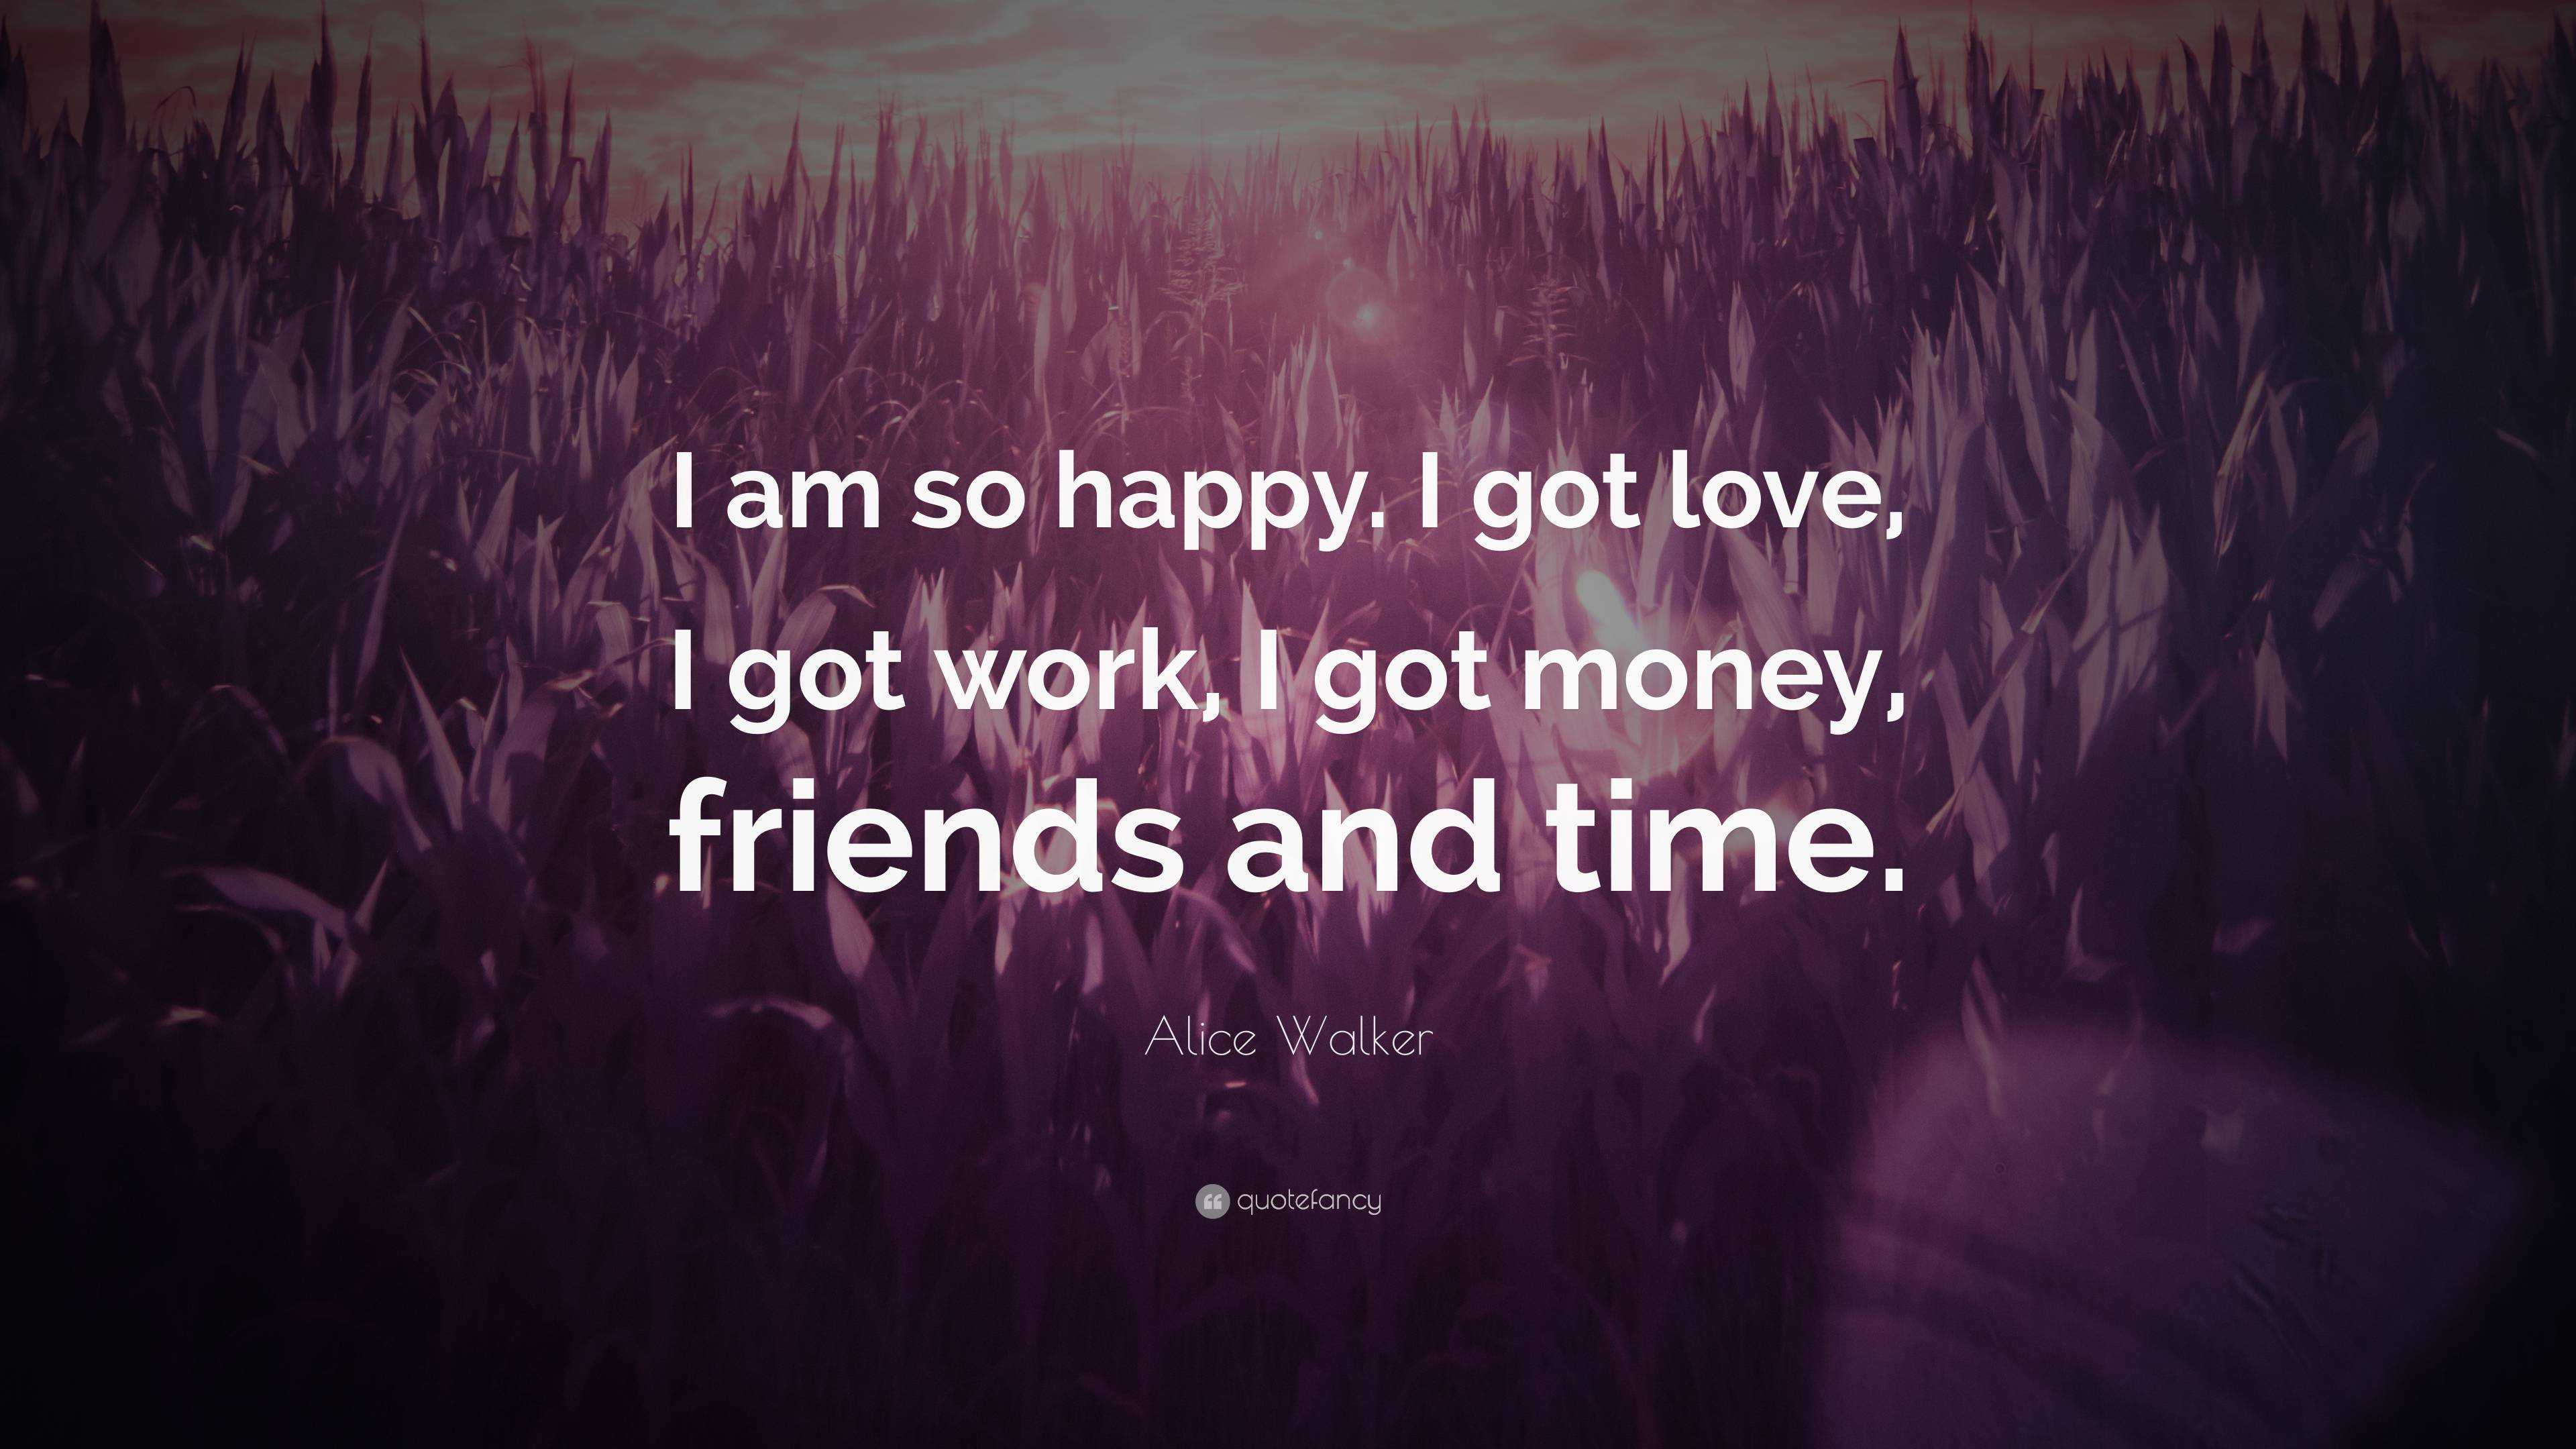 Alice Walker Quote I Am So Happy I Got Love I Got Work I Got Money Friends And Time 2 Wallpapers Quotefancy